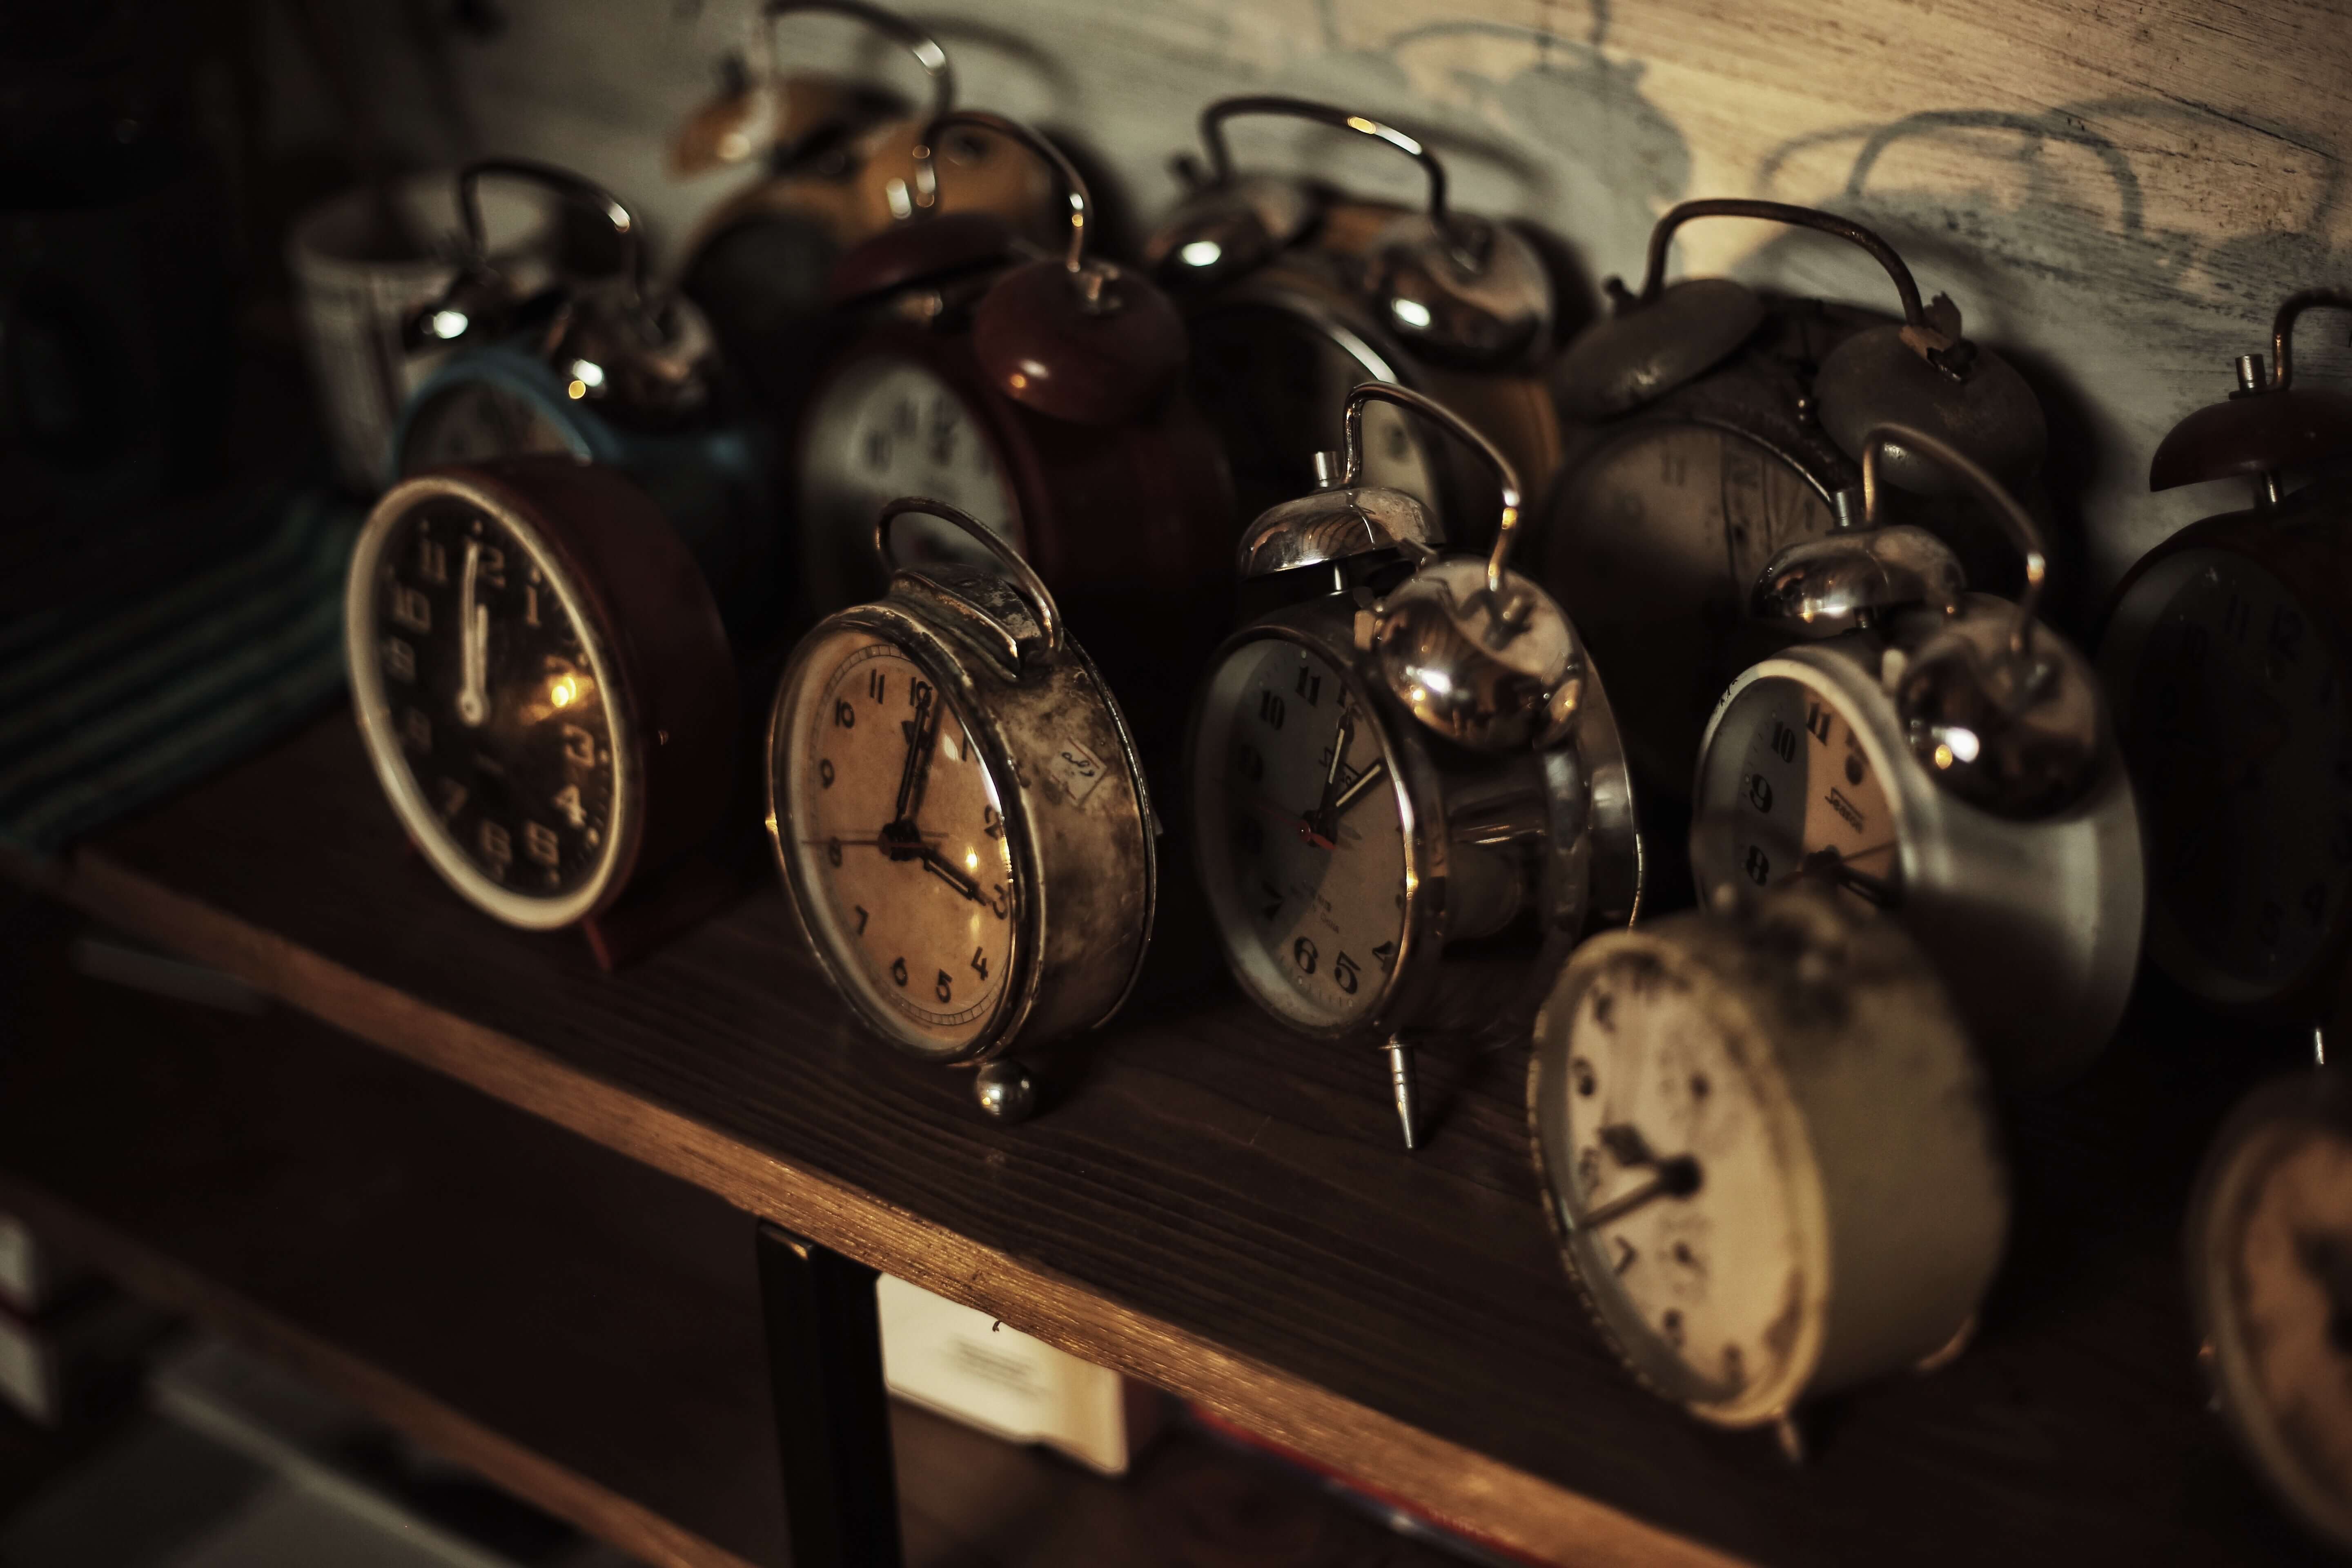 A collection of vintage clocks on a shelf